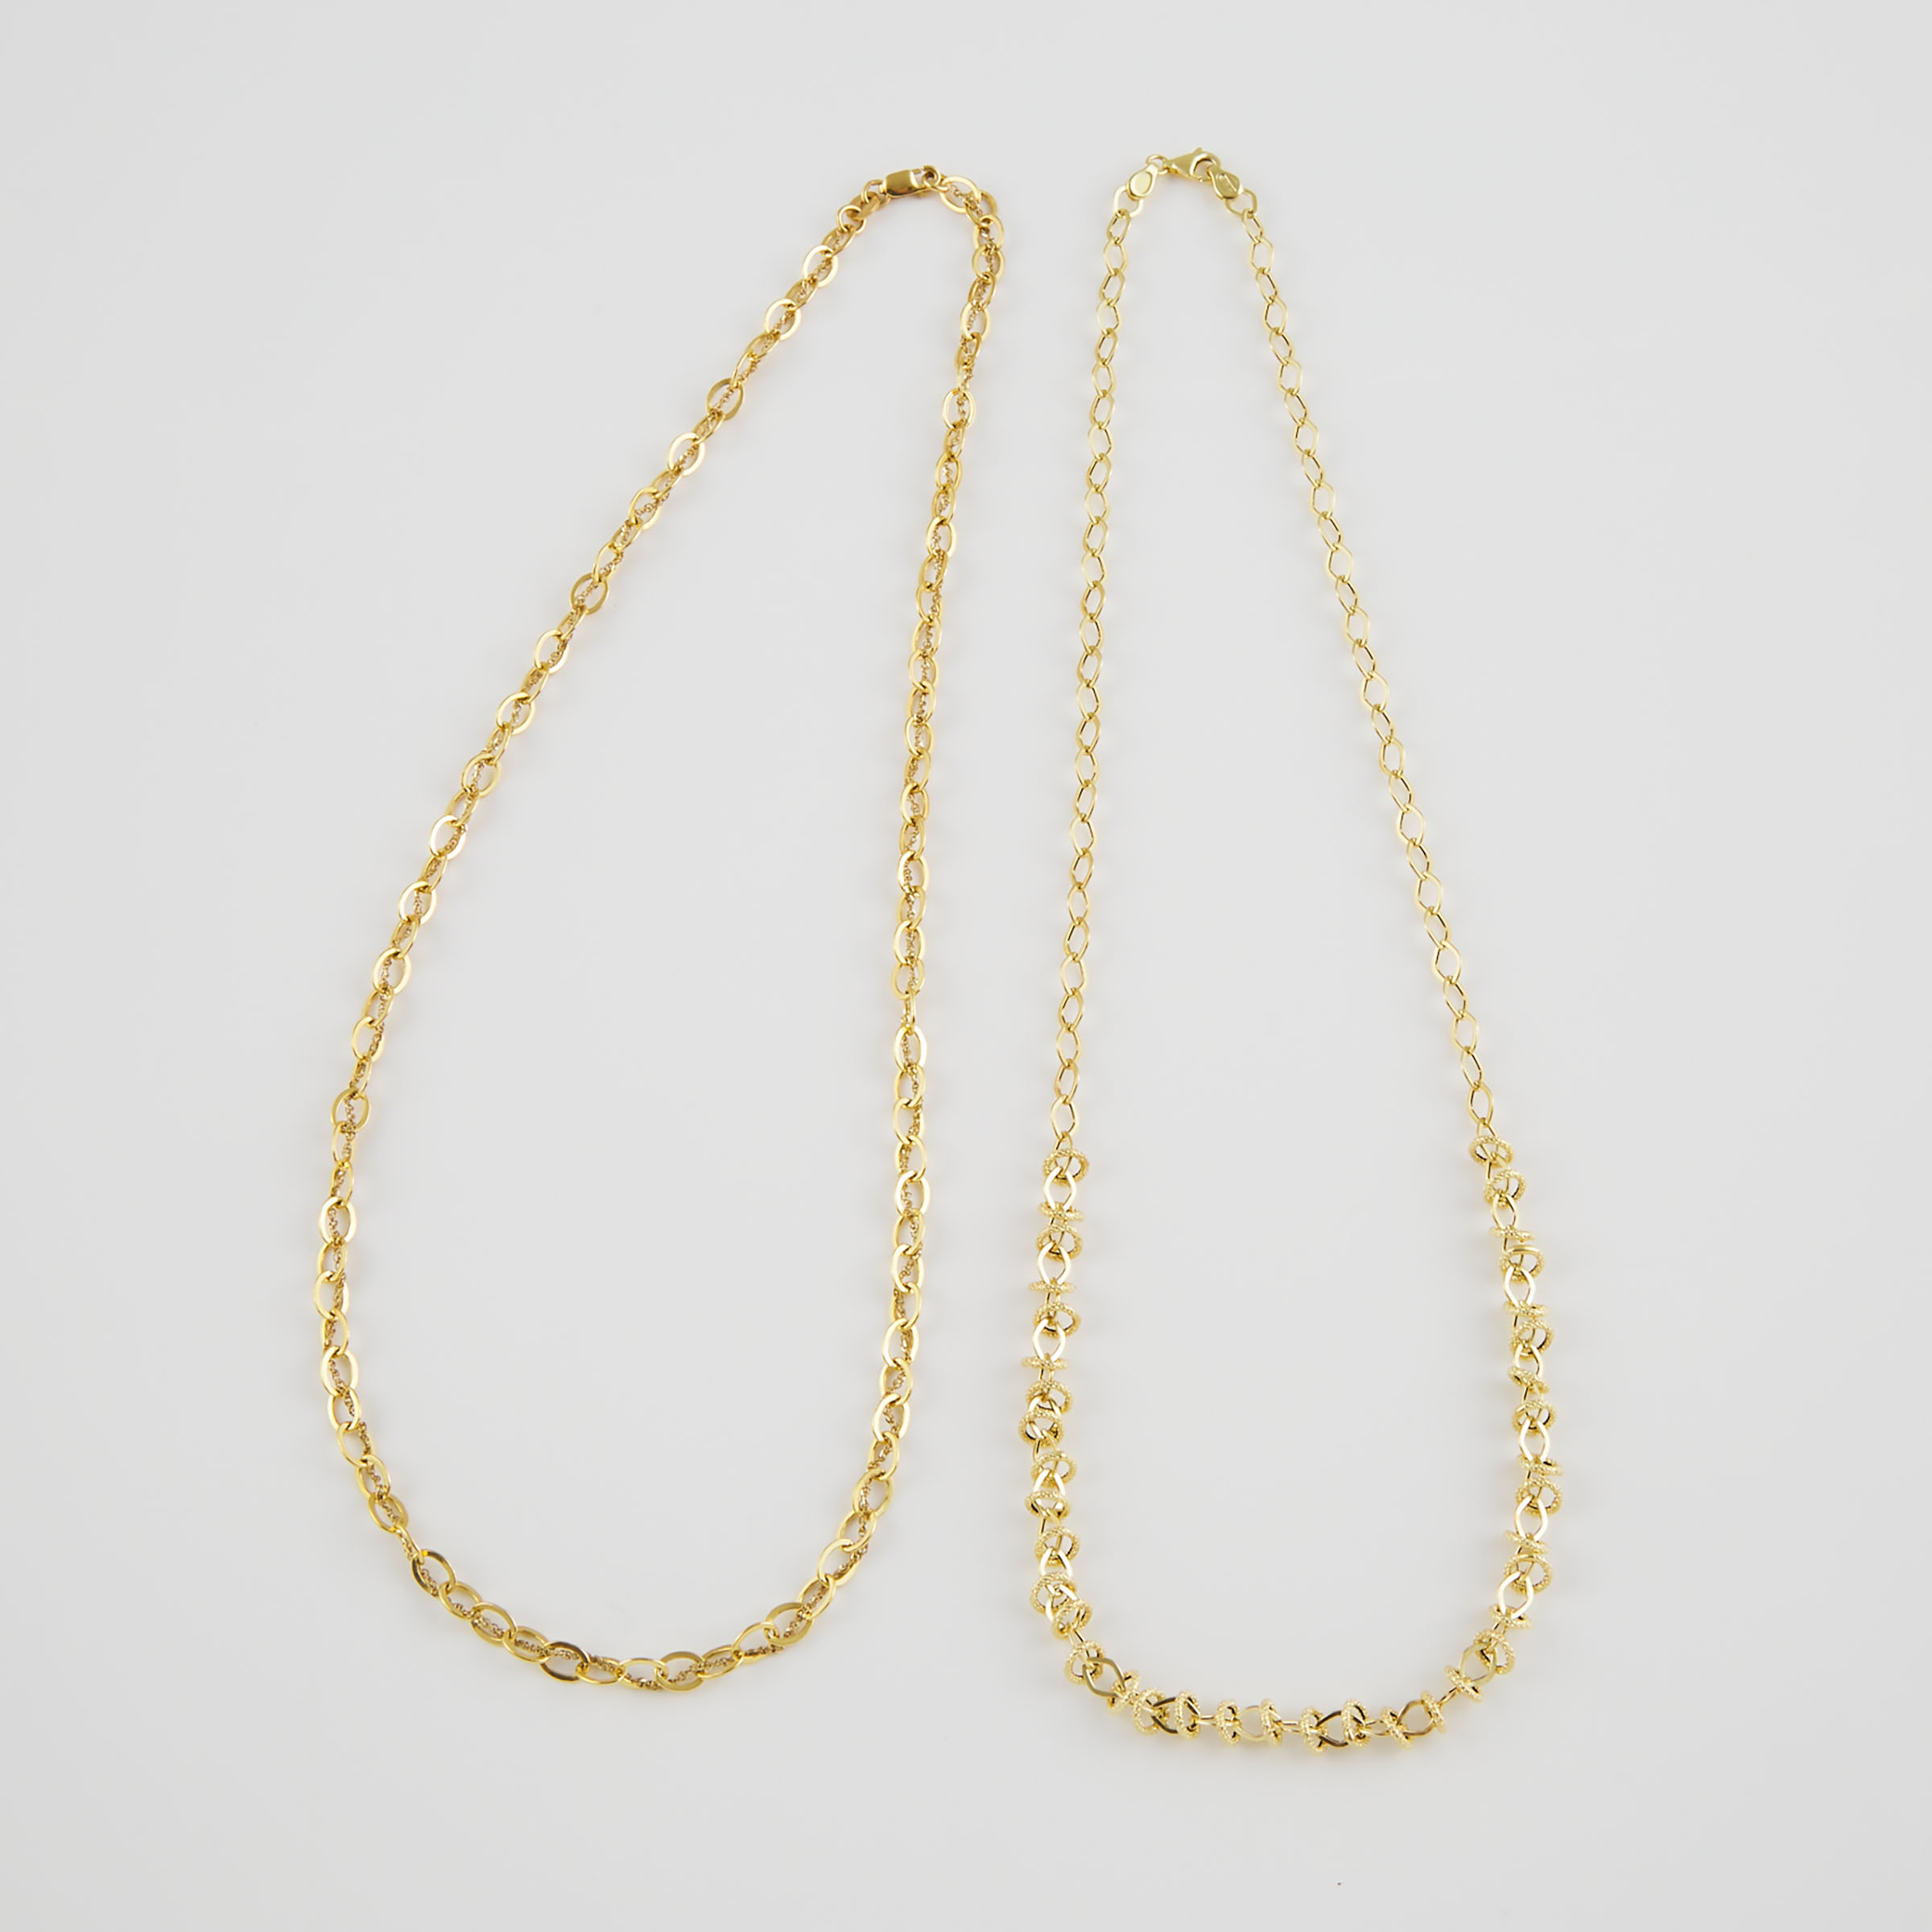 2 x 14k Yellow Gold Chains